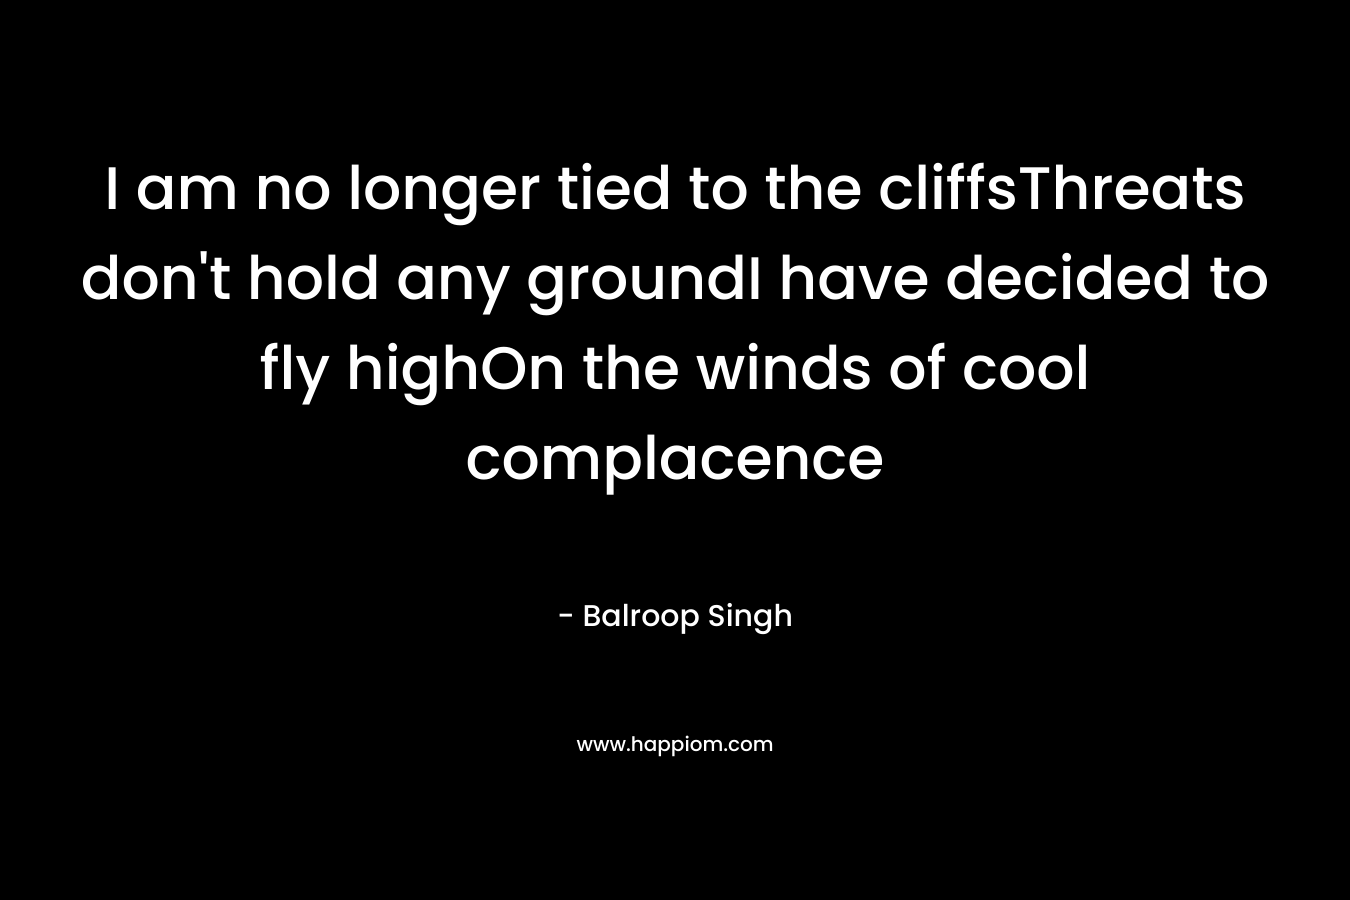 I am no longer tied to the cliffsThreats don’t hold any groundI have decided to fly highOn the winds of cool complacence – Balroop Singh